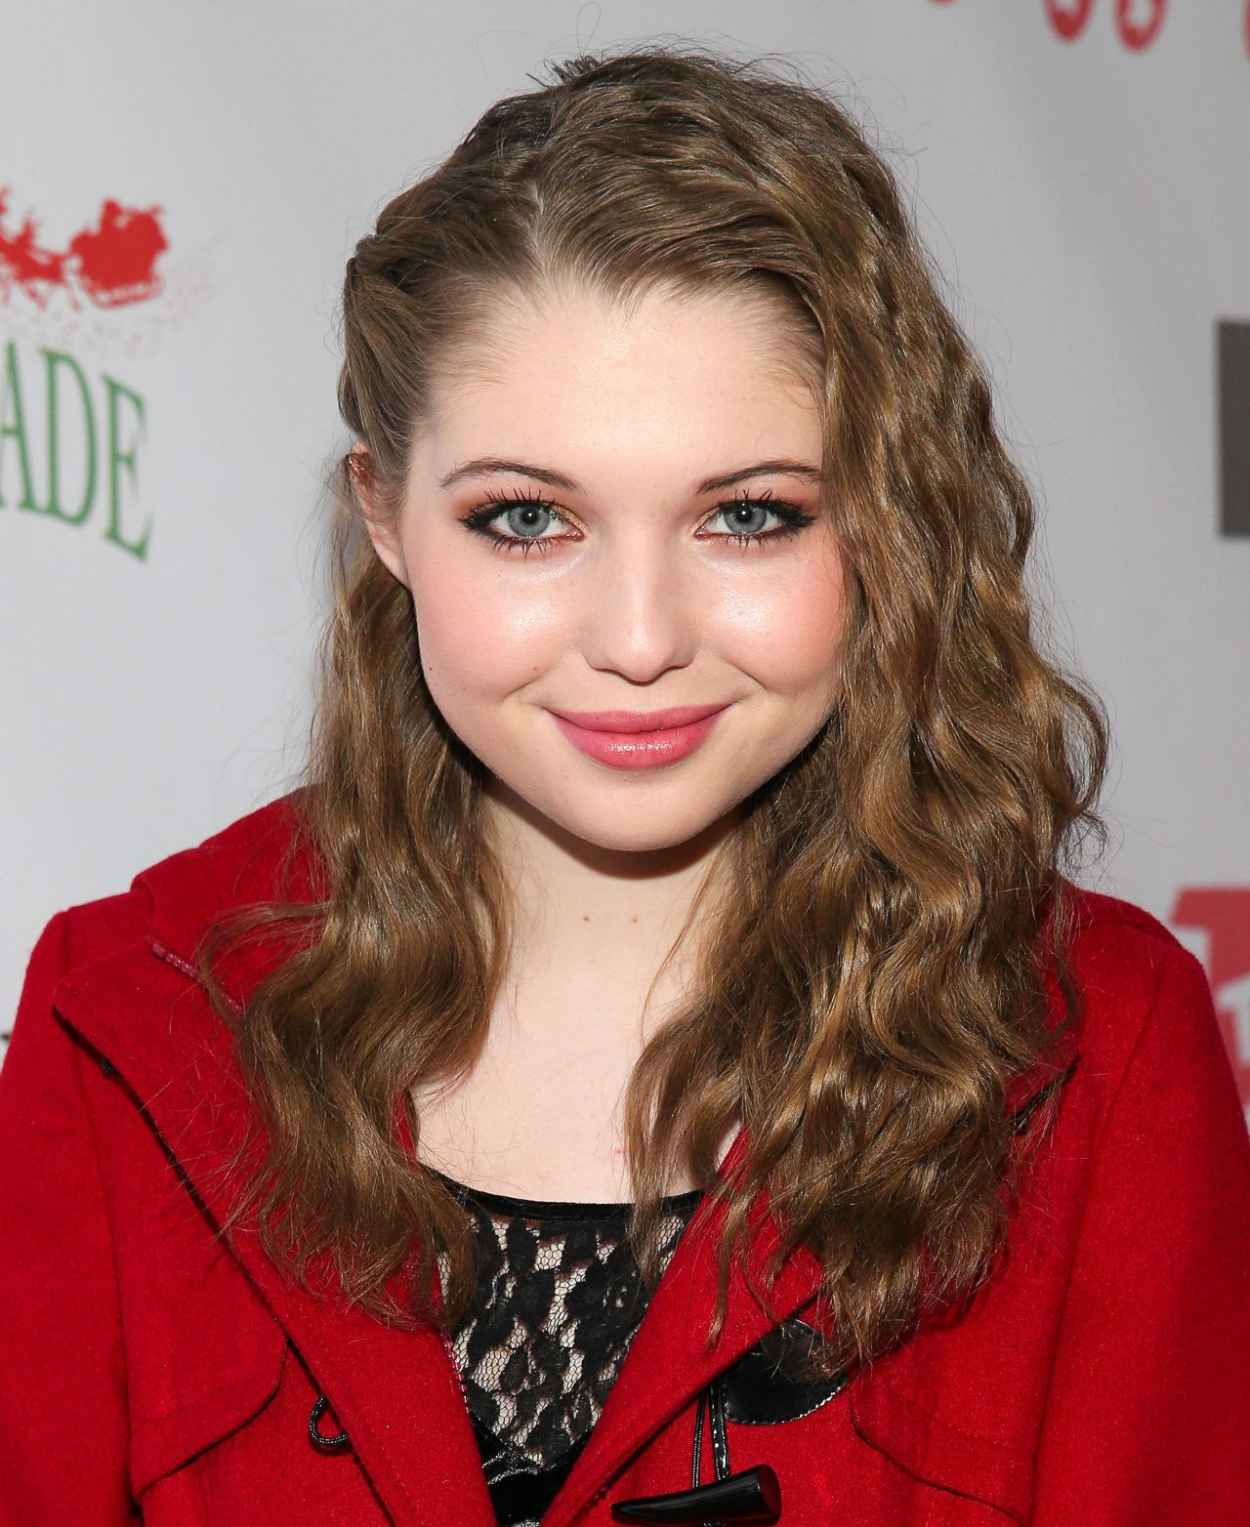 Sammi Hanratty Attends 82nd Annual Hollywood Christmas Parade in Hollywood, December 2015-1